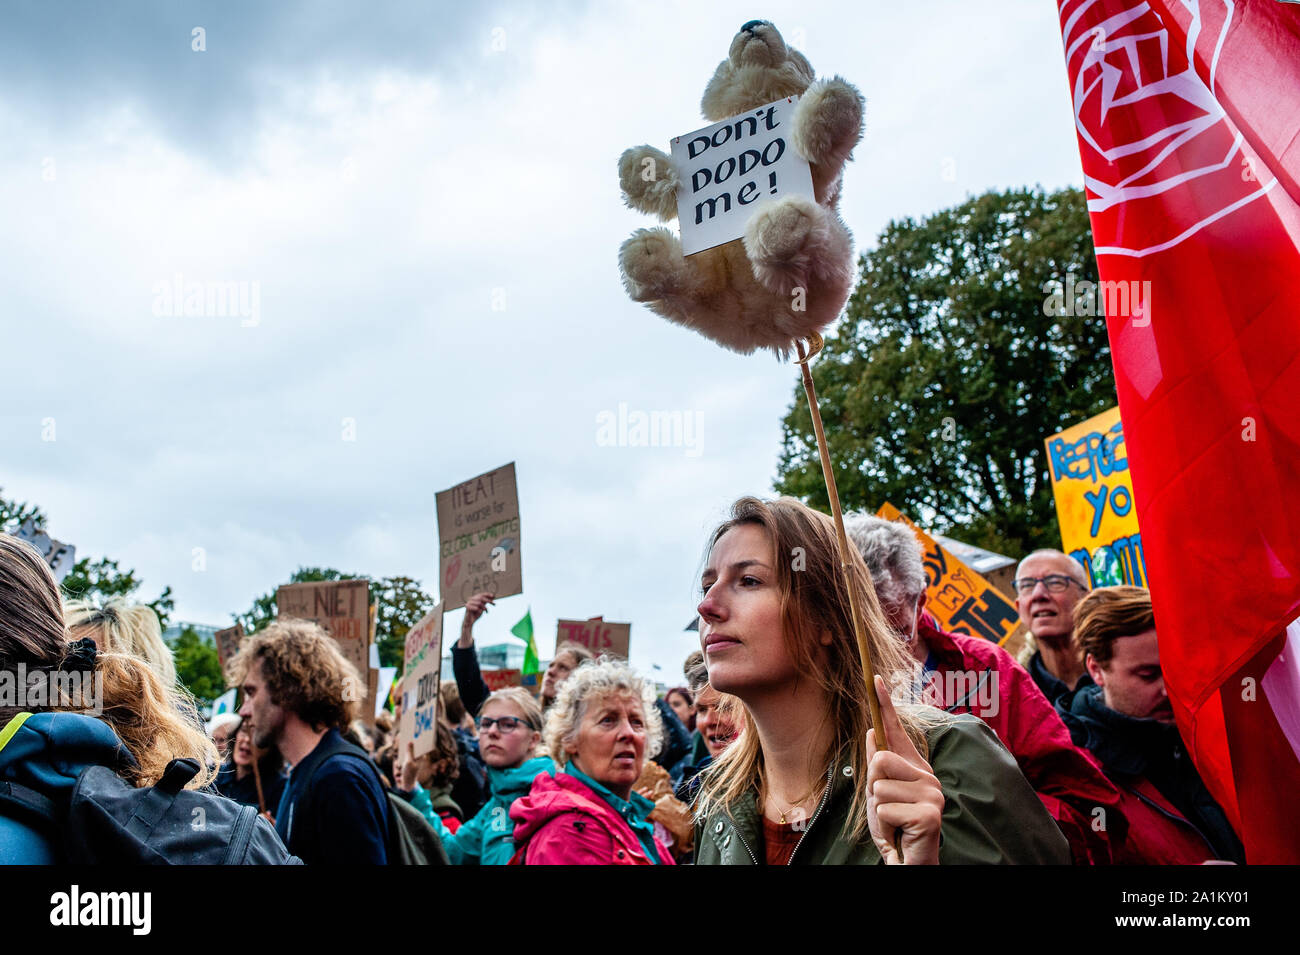 A woman holding a bear during the demonstration.Large coalition of organizations in The Netherlands organized the climate strike, and it is part of the largest international climate mobilisation in history. Building on the successful youth strikes that started almost a year ago, thousands of people strike together for the first time to demand a liveable and just world, now and for the future. Stock Photo